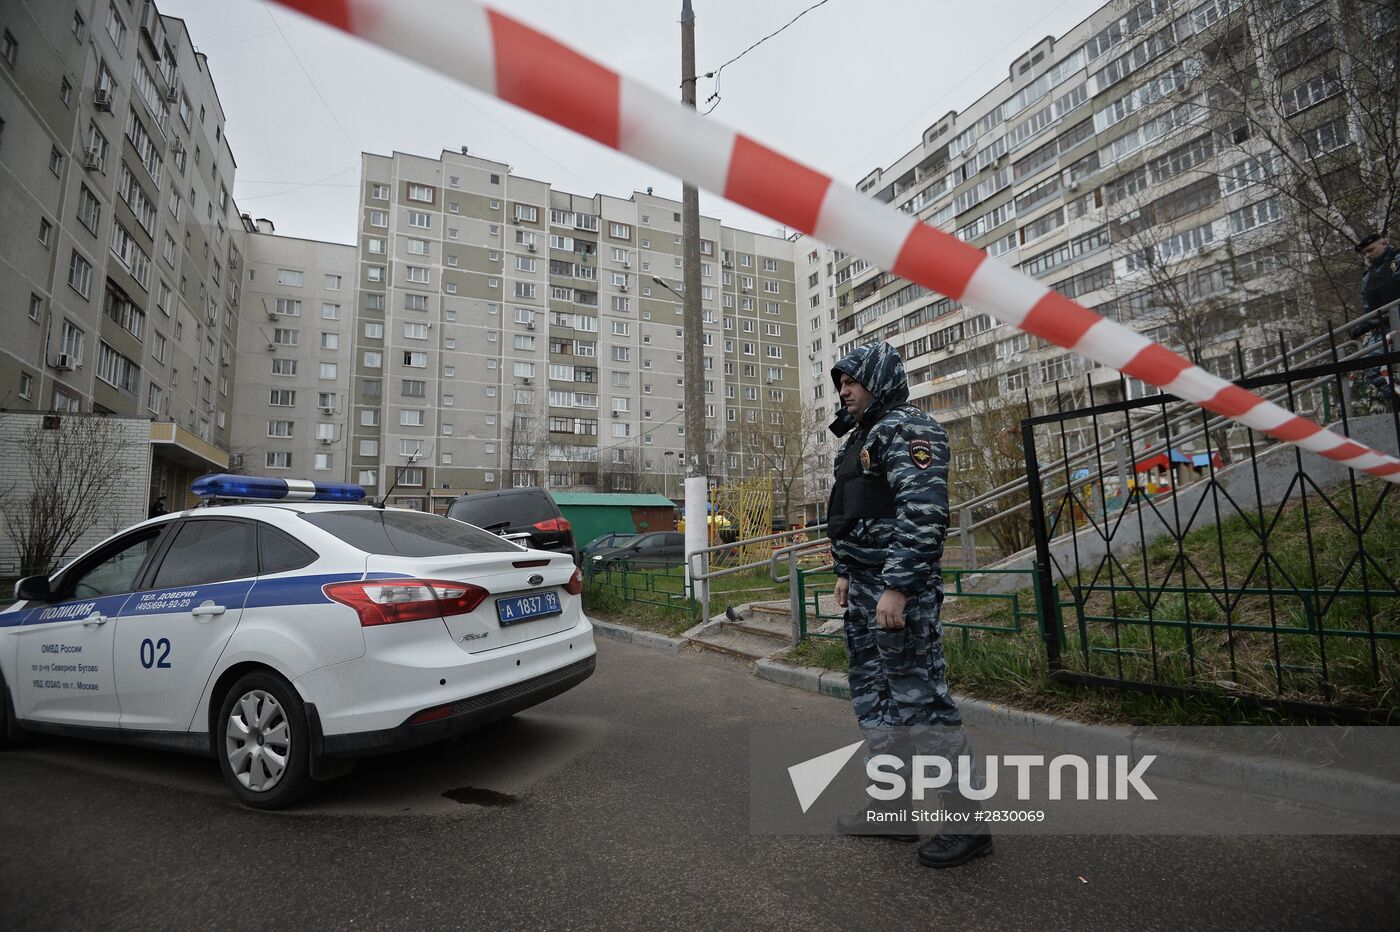 Cache of weapons and munitions found in 9-storied building basement in south Moscow